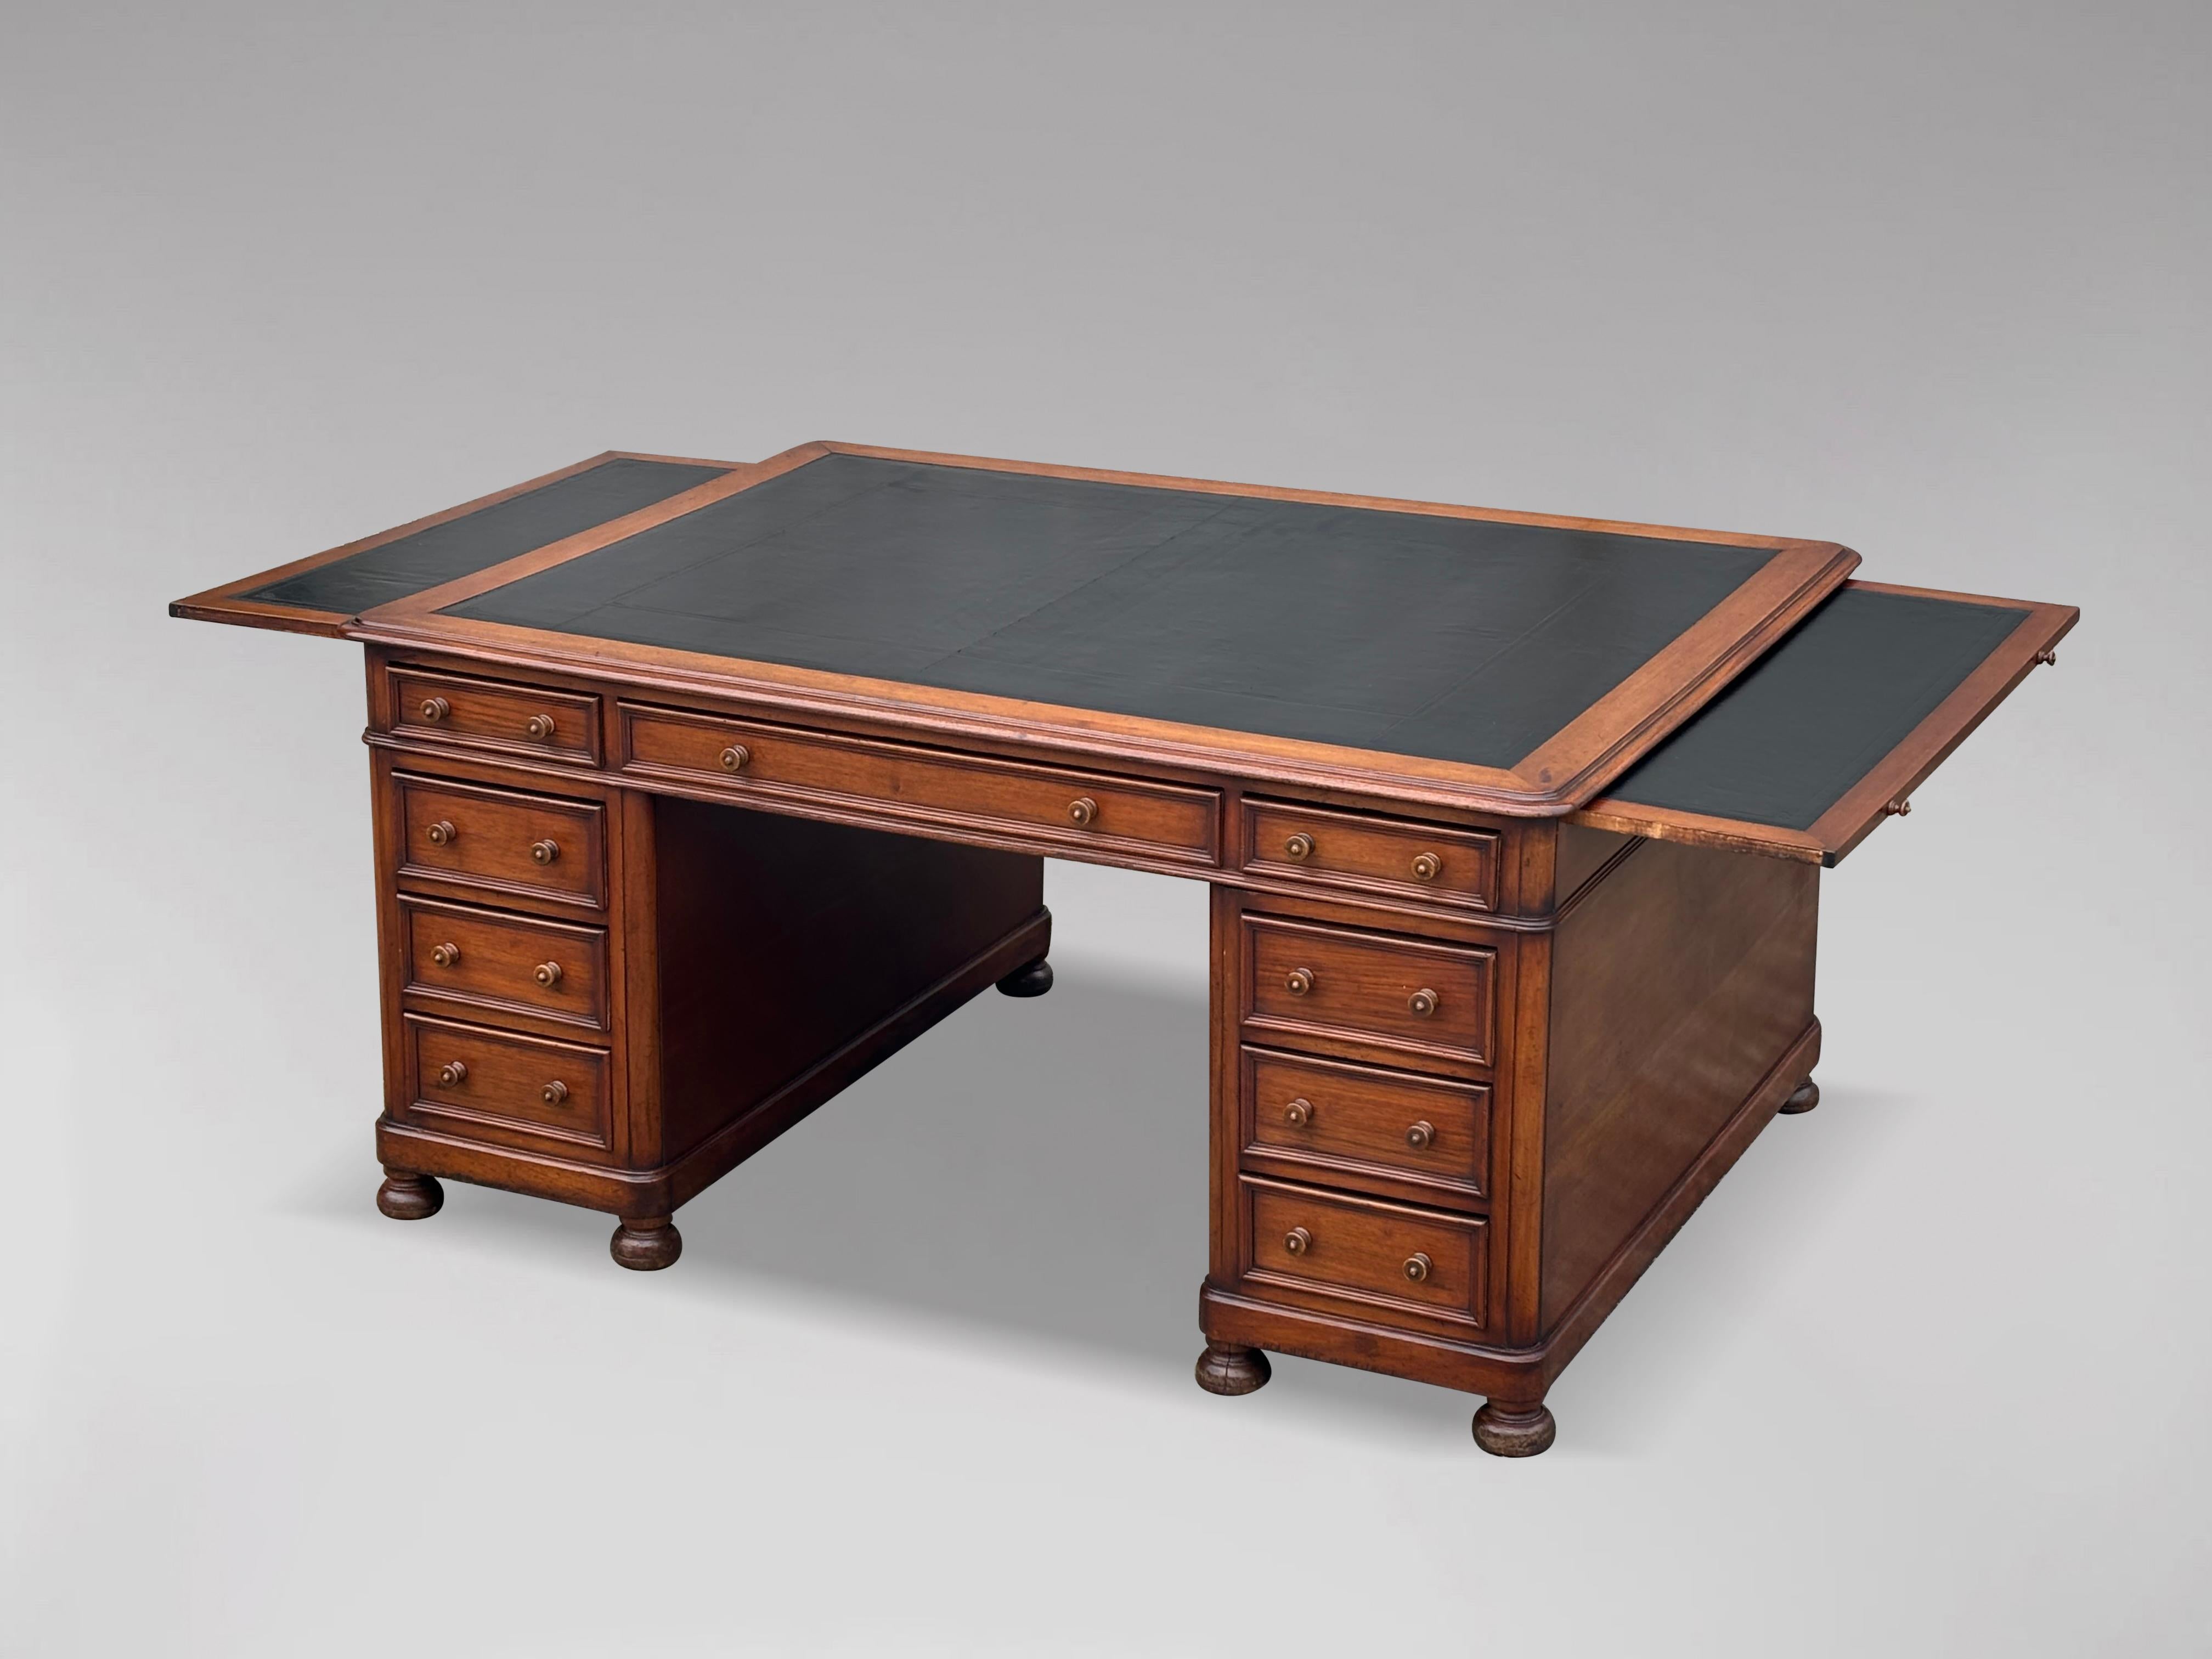 19th Century French Walnut Partners Pedestal Desk In Good Condition In Petworth,West Sussex, GB